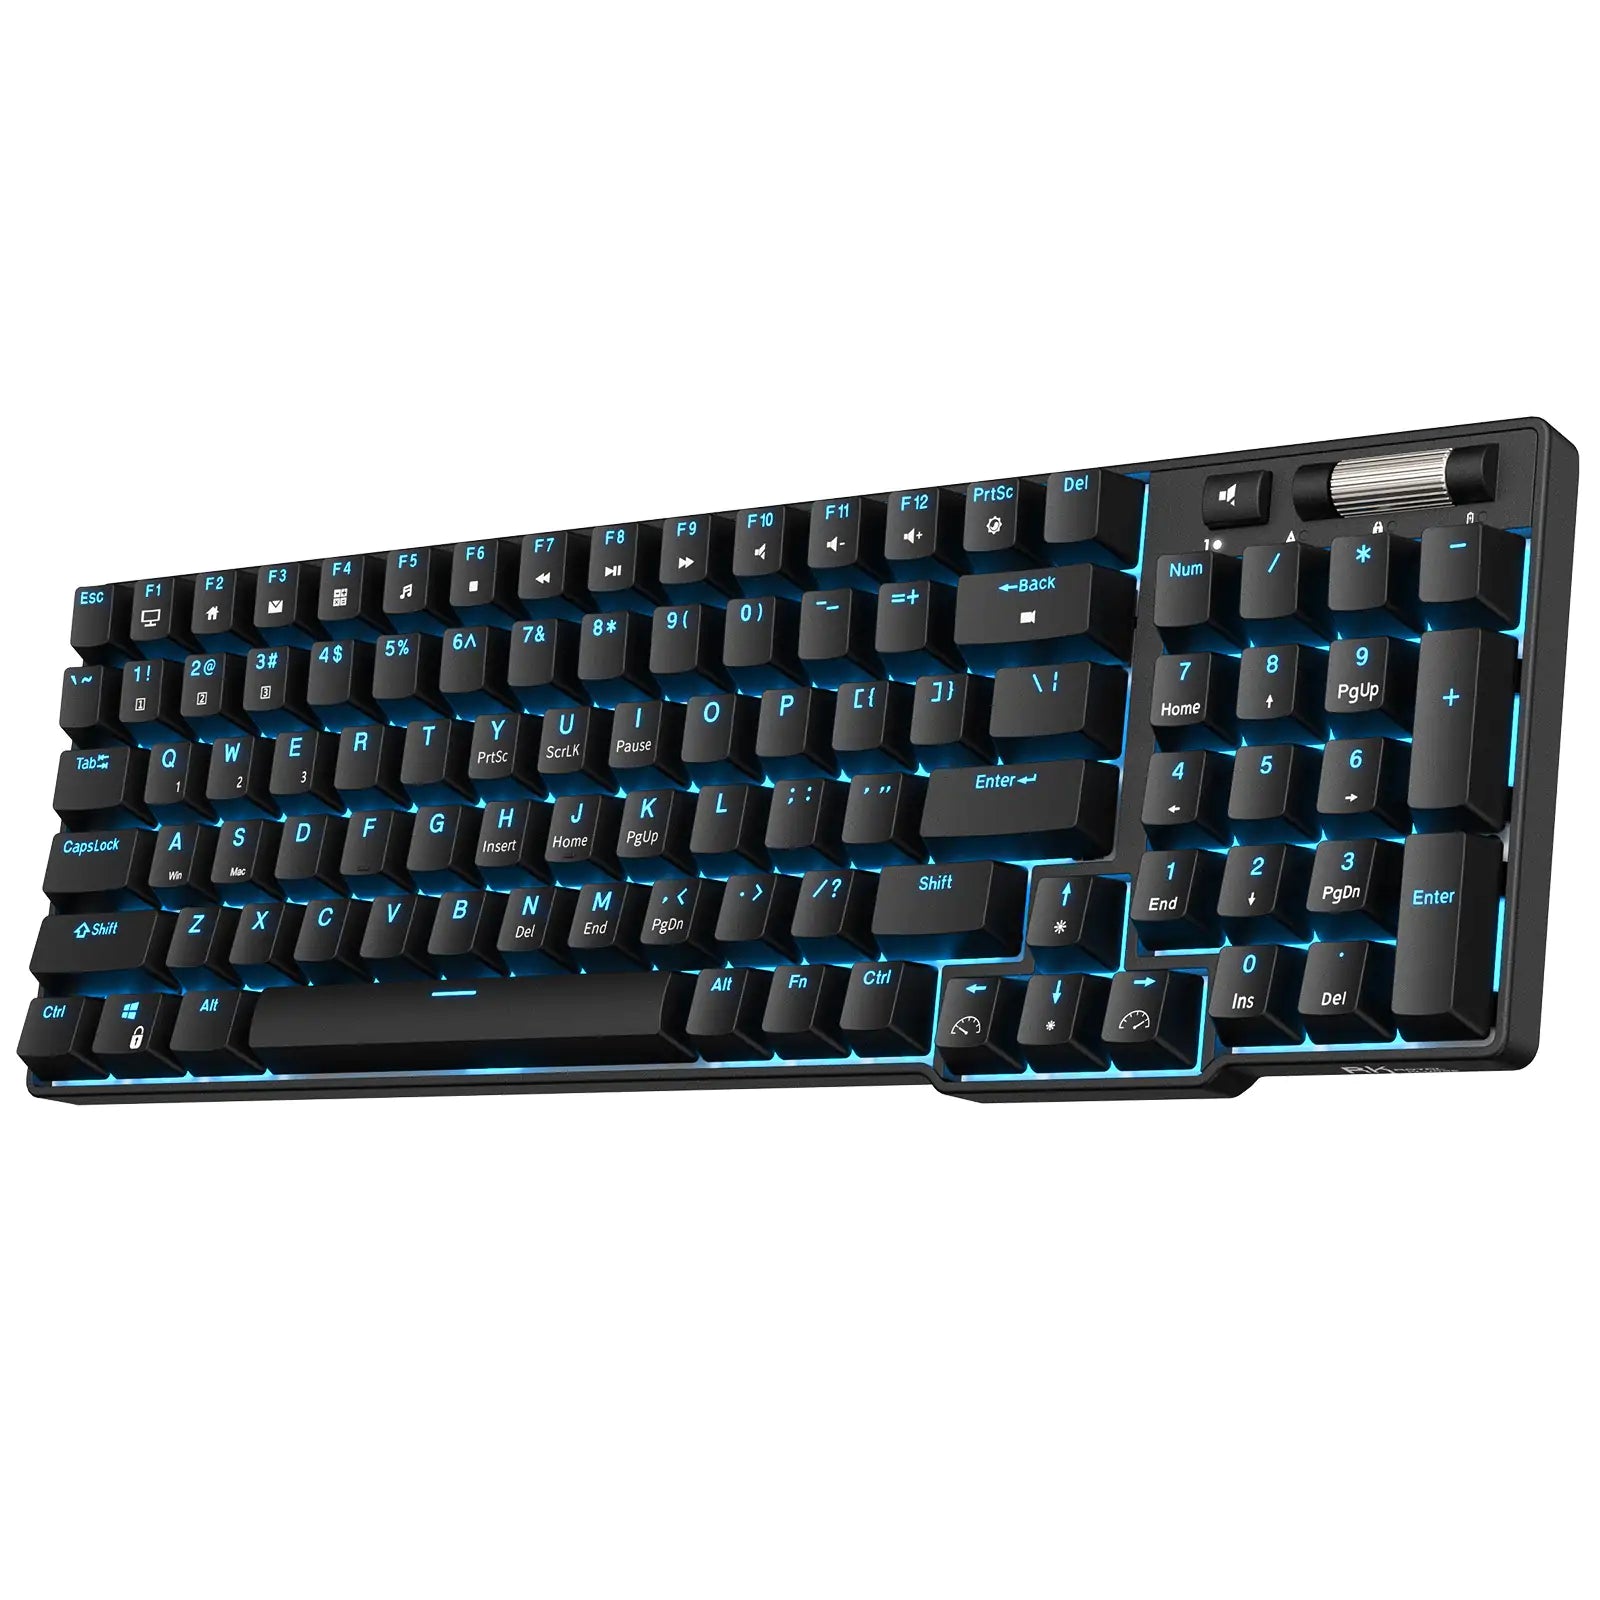 RK ROYAL KLUDGE RK96 90% 96 Keys BT5.0/2.4G/USB-C Hot Swappable Mechanical Keyboard with Magnetic Hand Rest, Blue Backlight, Brown Switch, Black Color